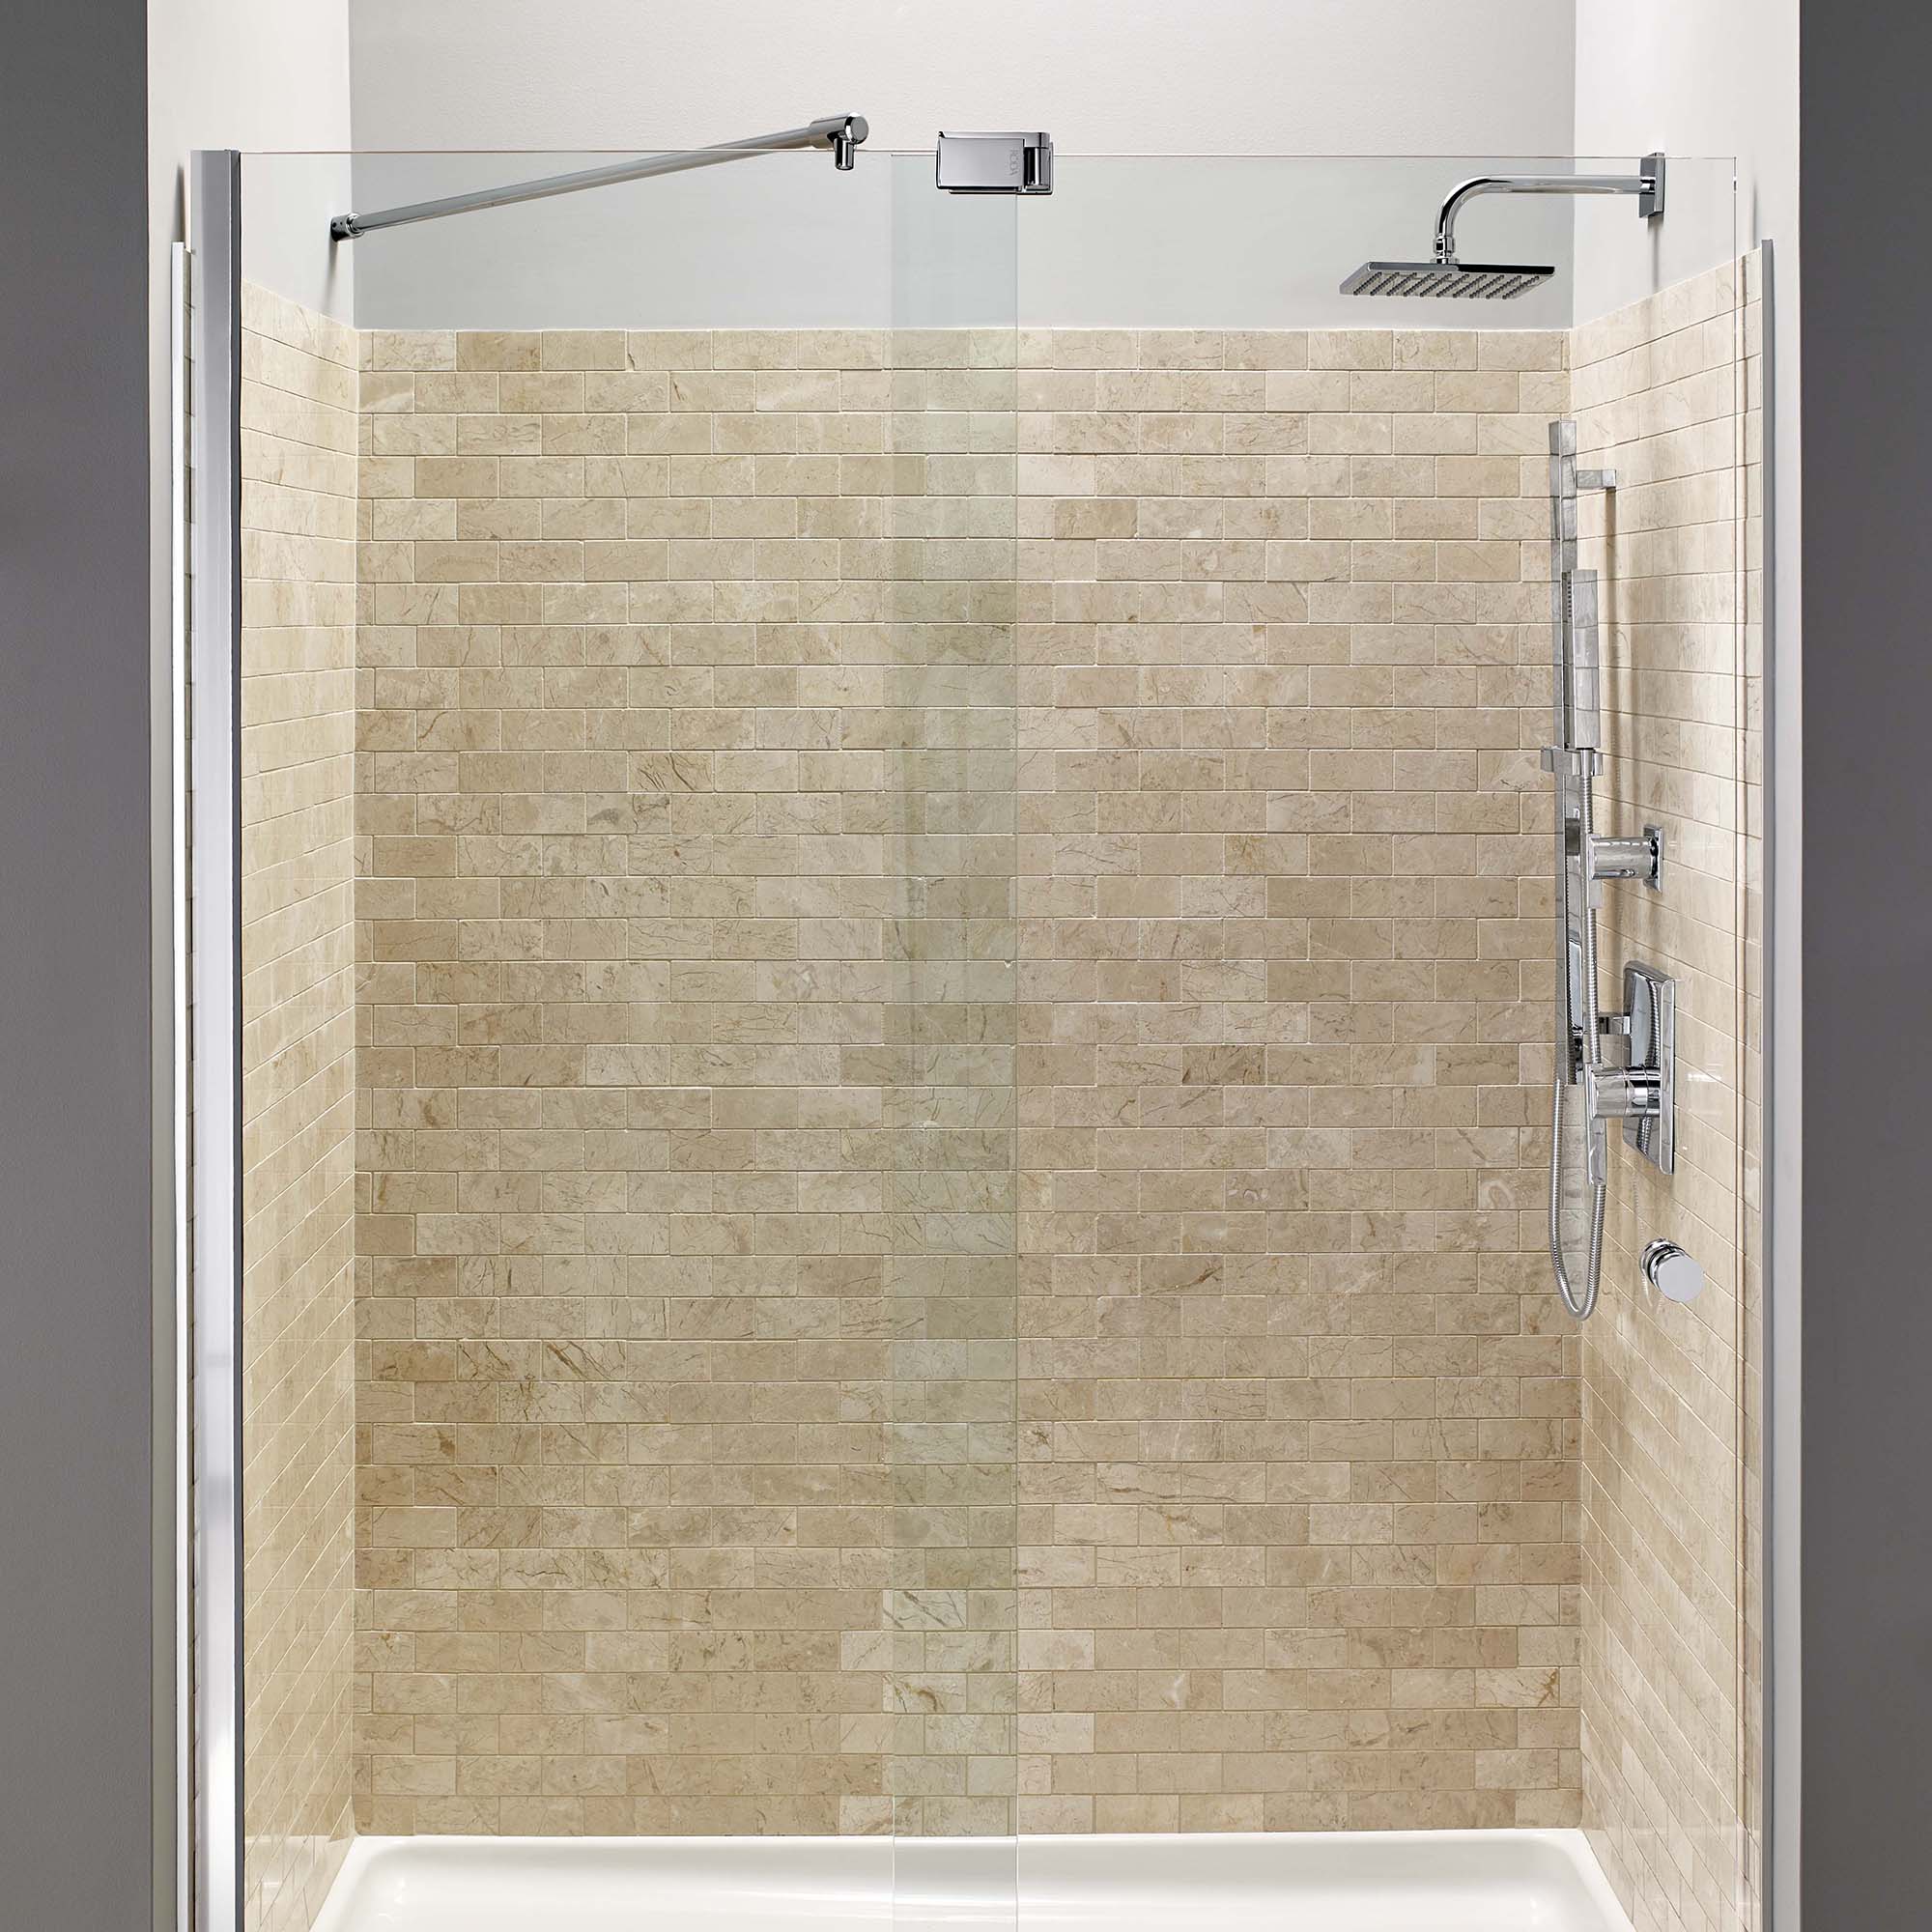 Times Square 2.5 GPM Tub and Shower Trim Kit with FloWise Showerhead and Lever Handle